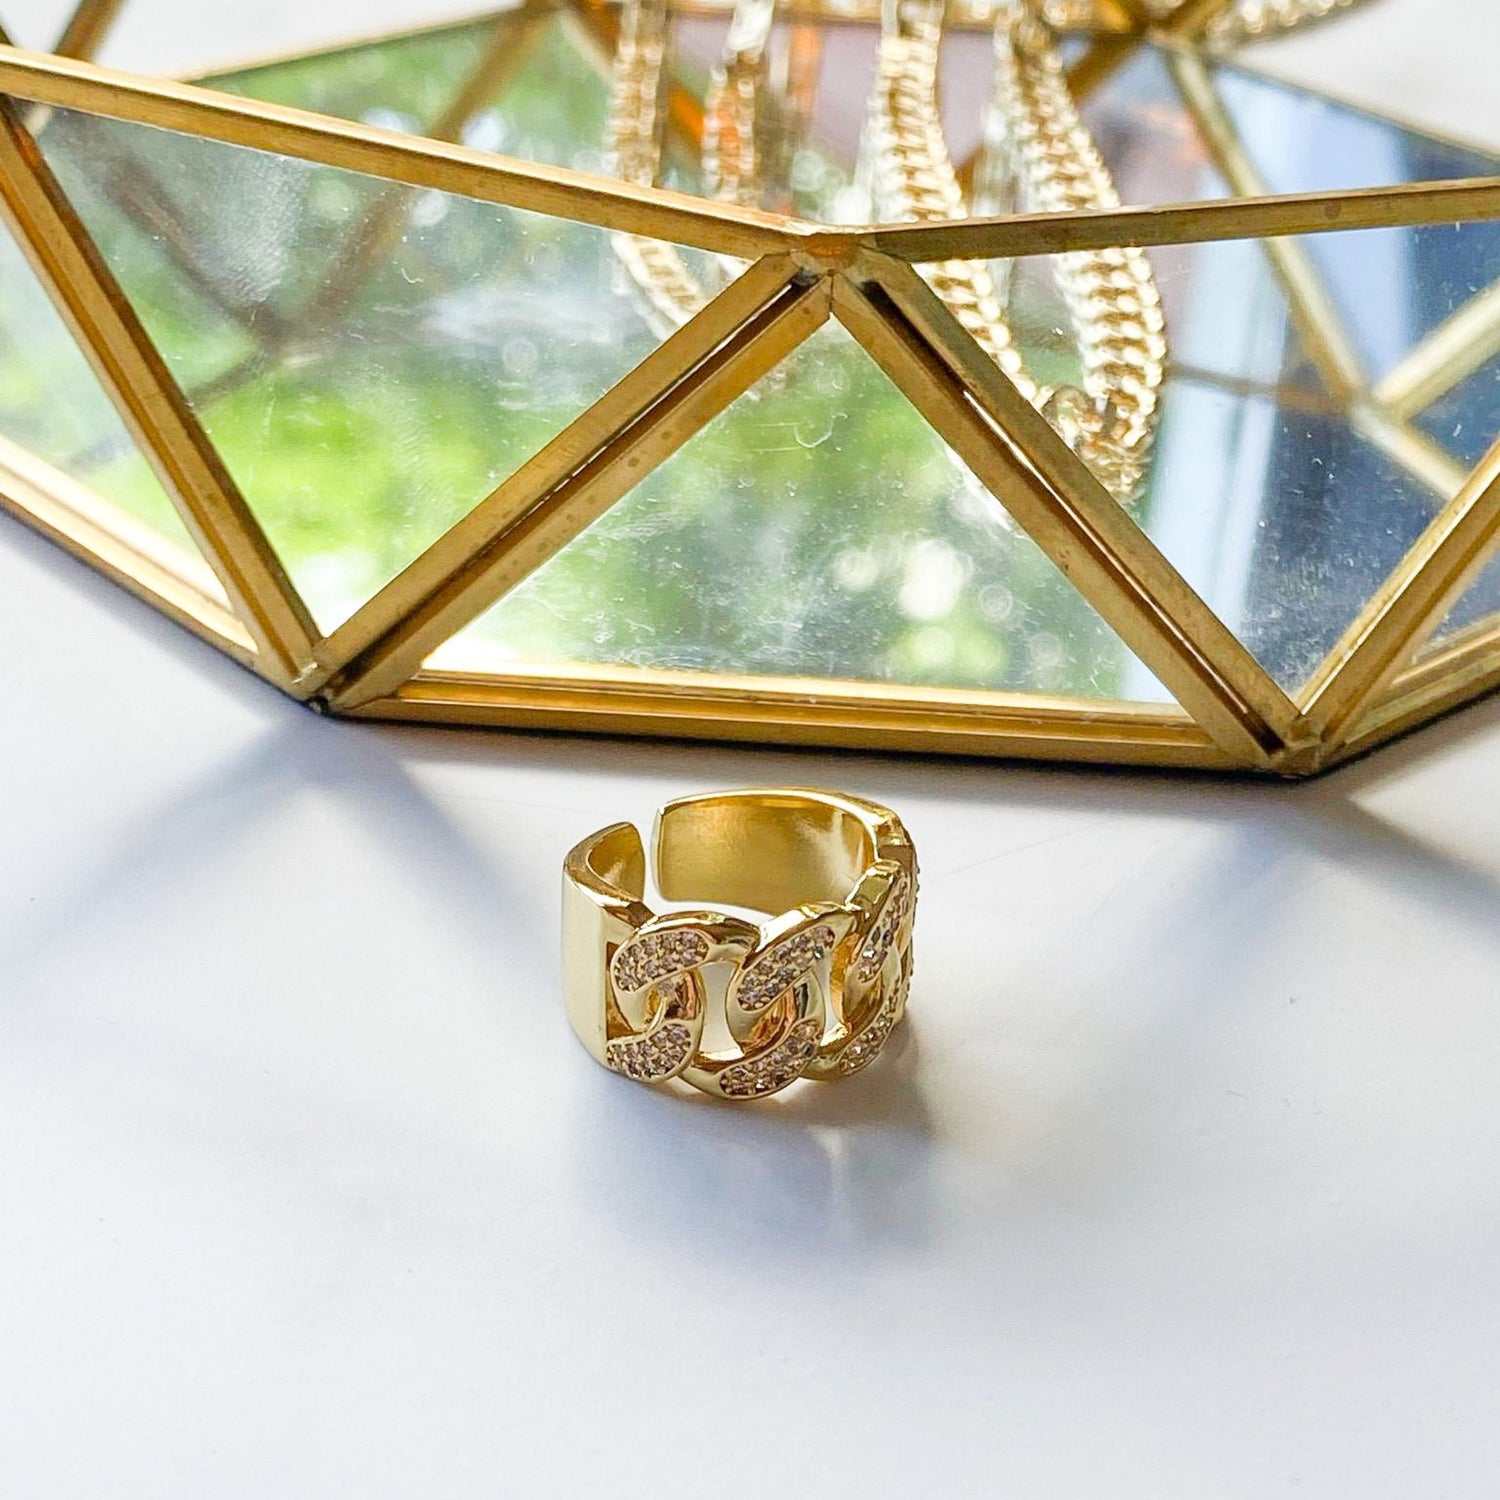 Lucy gold-filled ring, by ISVI Boutique Miami, adjustable, water-resistant. Made in Brazil